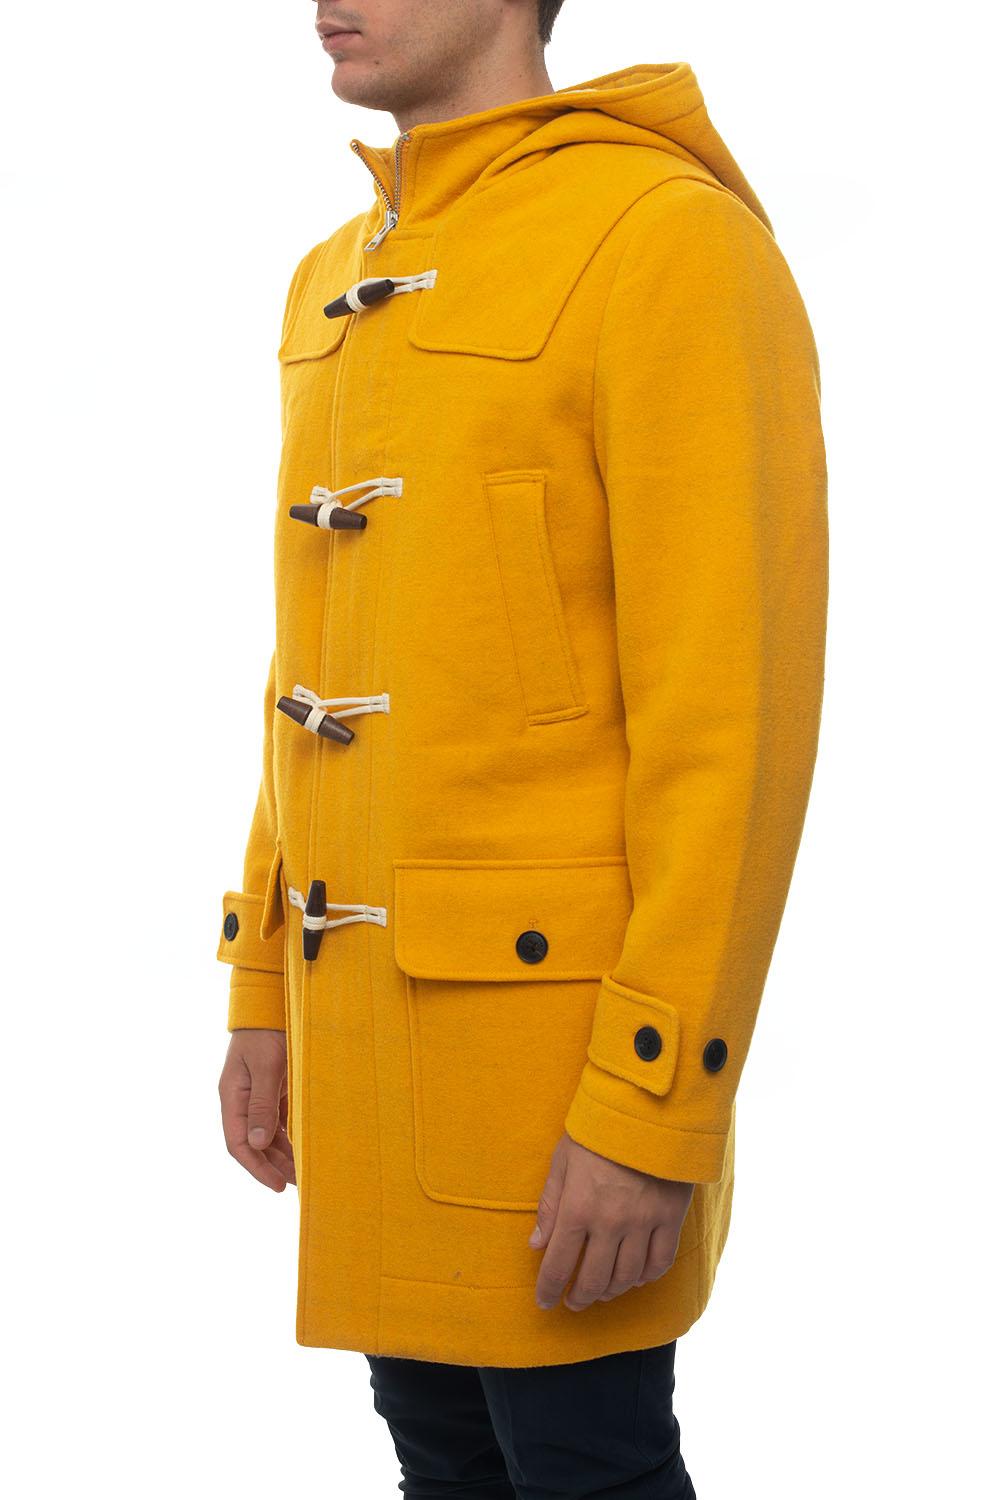 GANT Duffle Coat With Frog Fastening Yellow Wool for Men - Lyst